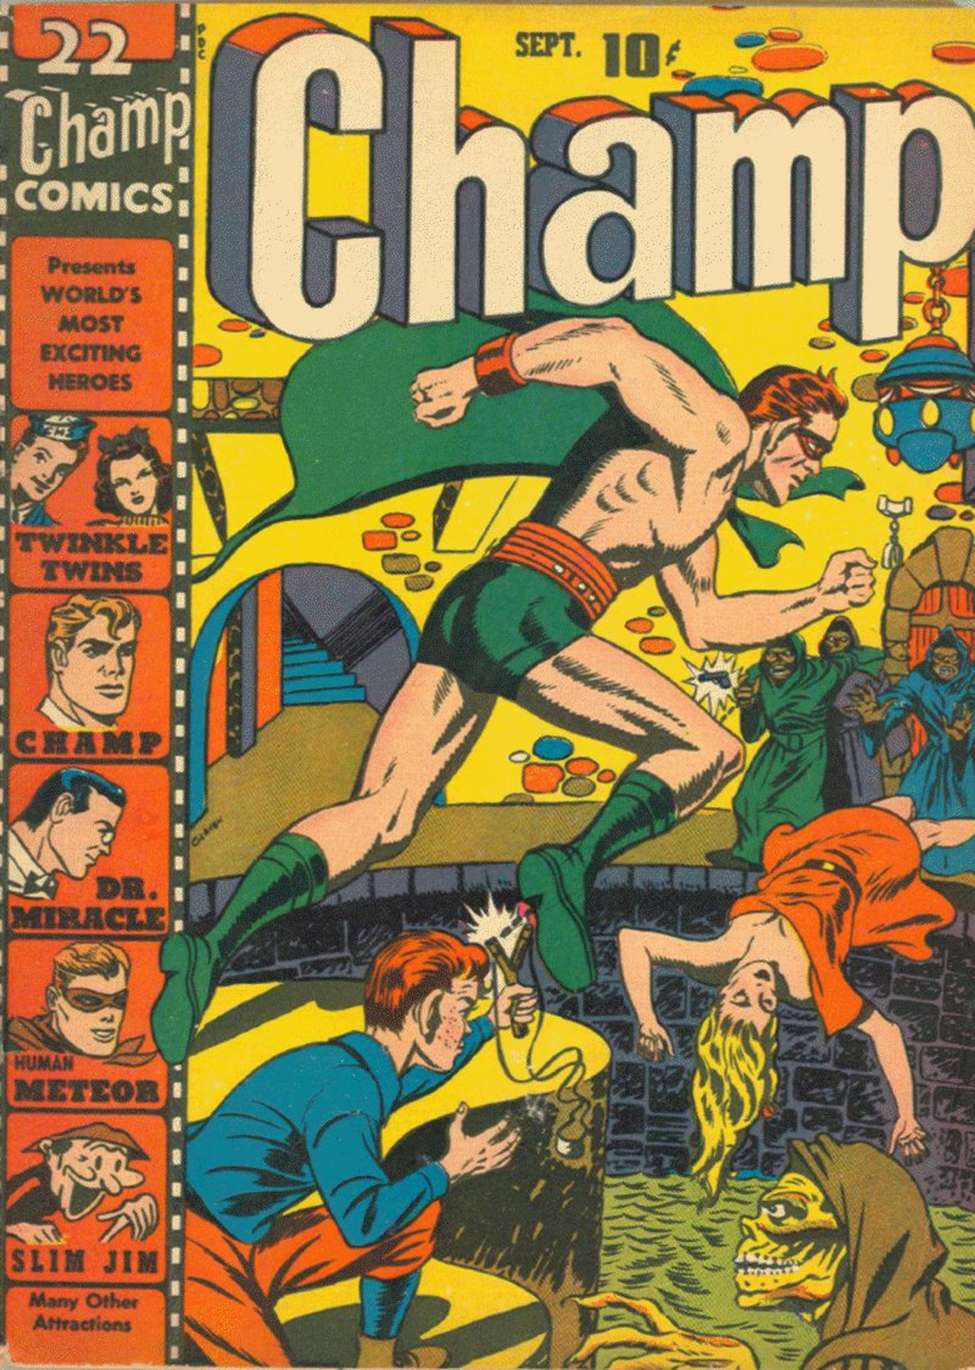 Book Cover For Champ Comics 22